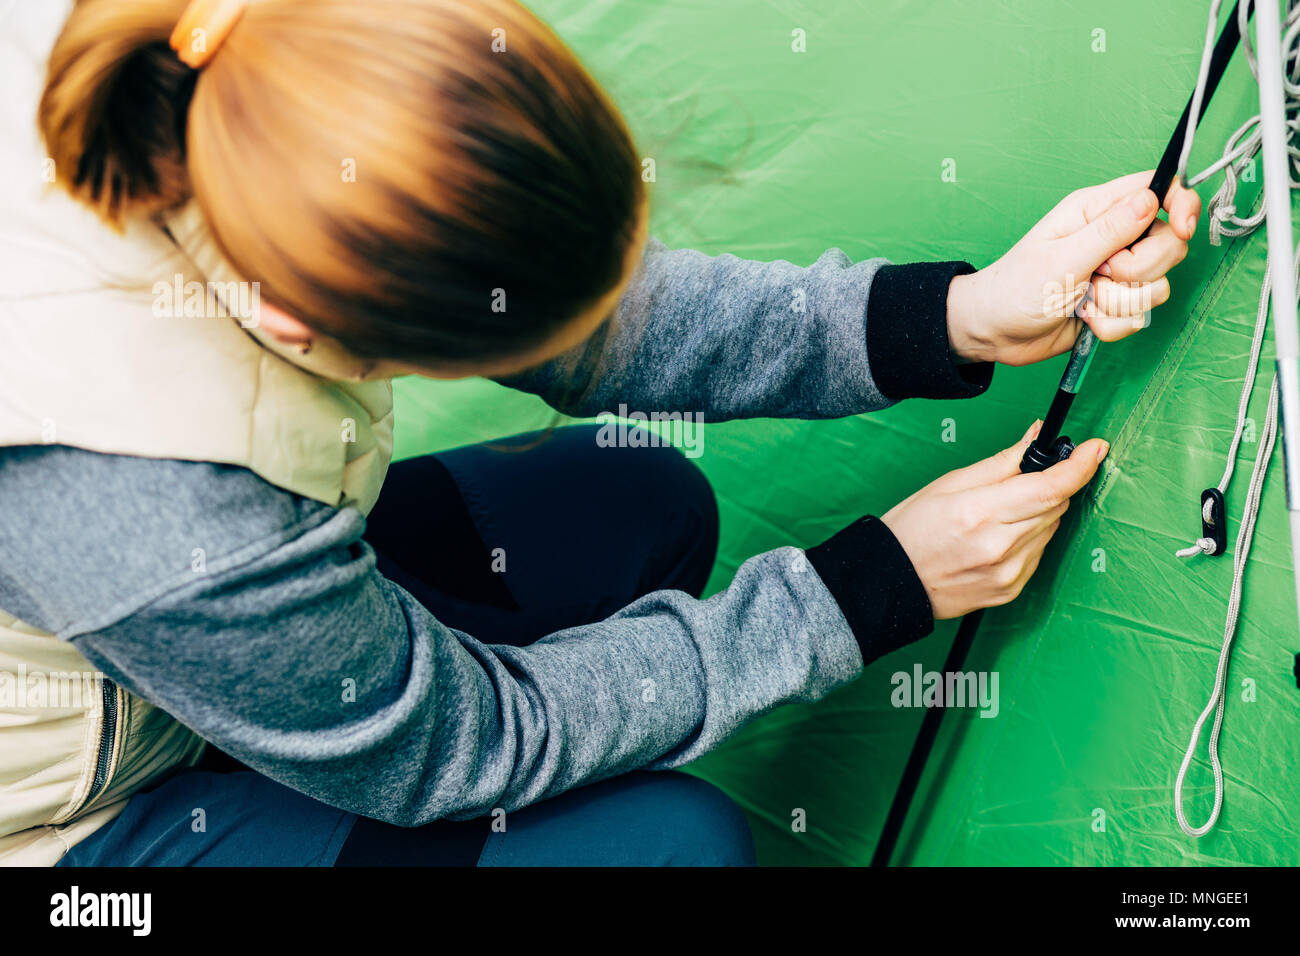 female hiker putting up tent Stock Photo